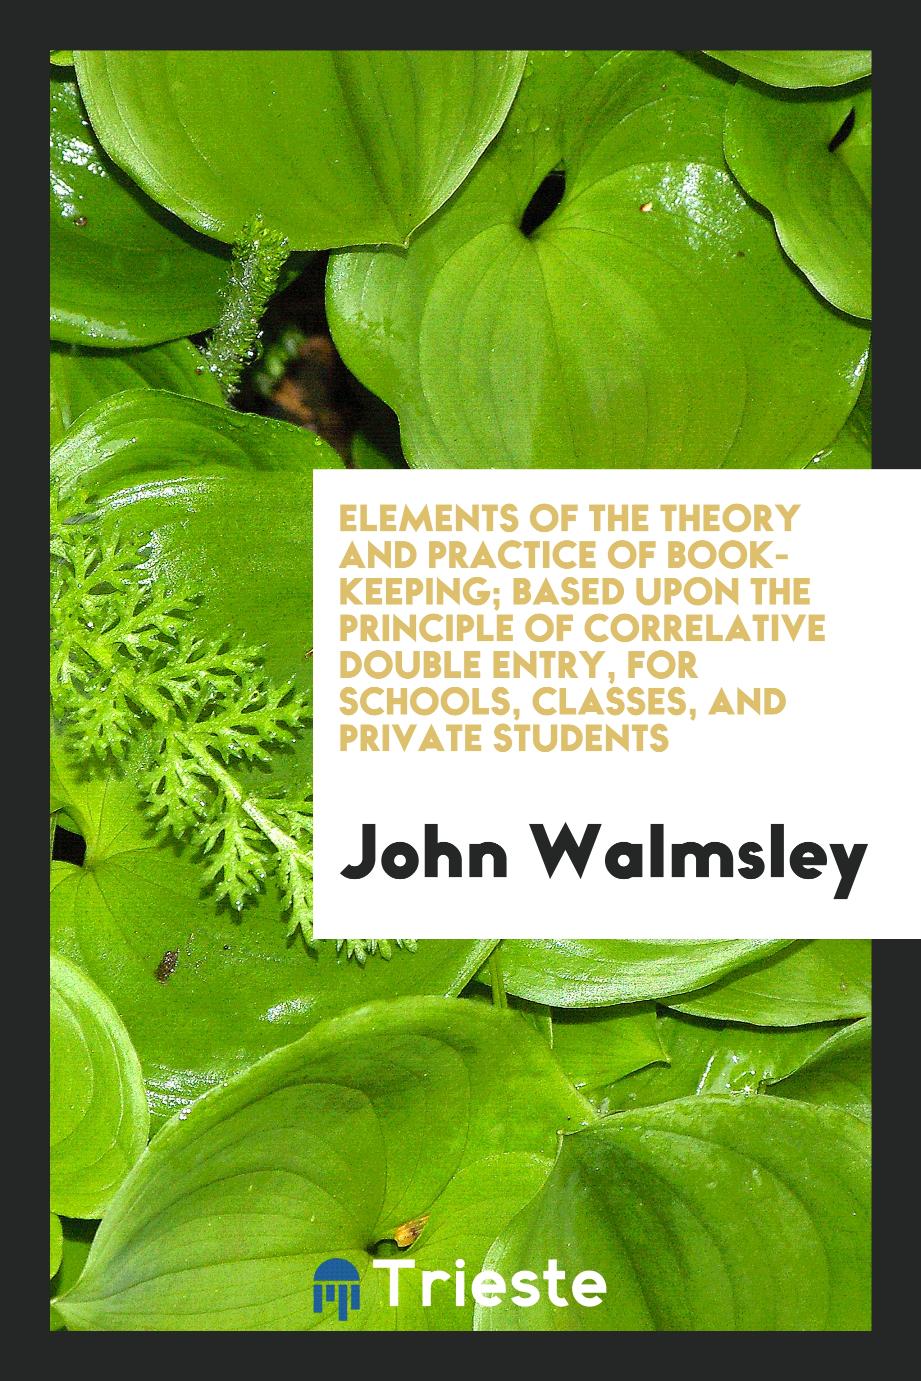 Elements of the Theory and Practice of Book-Keeping; Based upon the Principle of Correlative Double Entry, for Schools, Classes, and Private Students